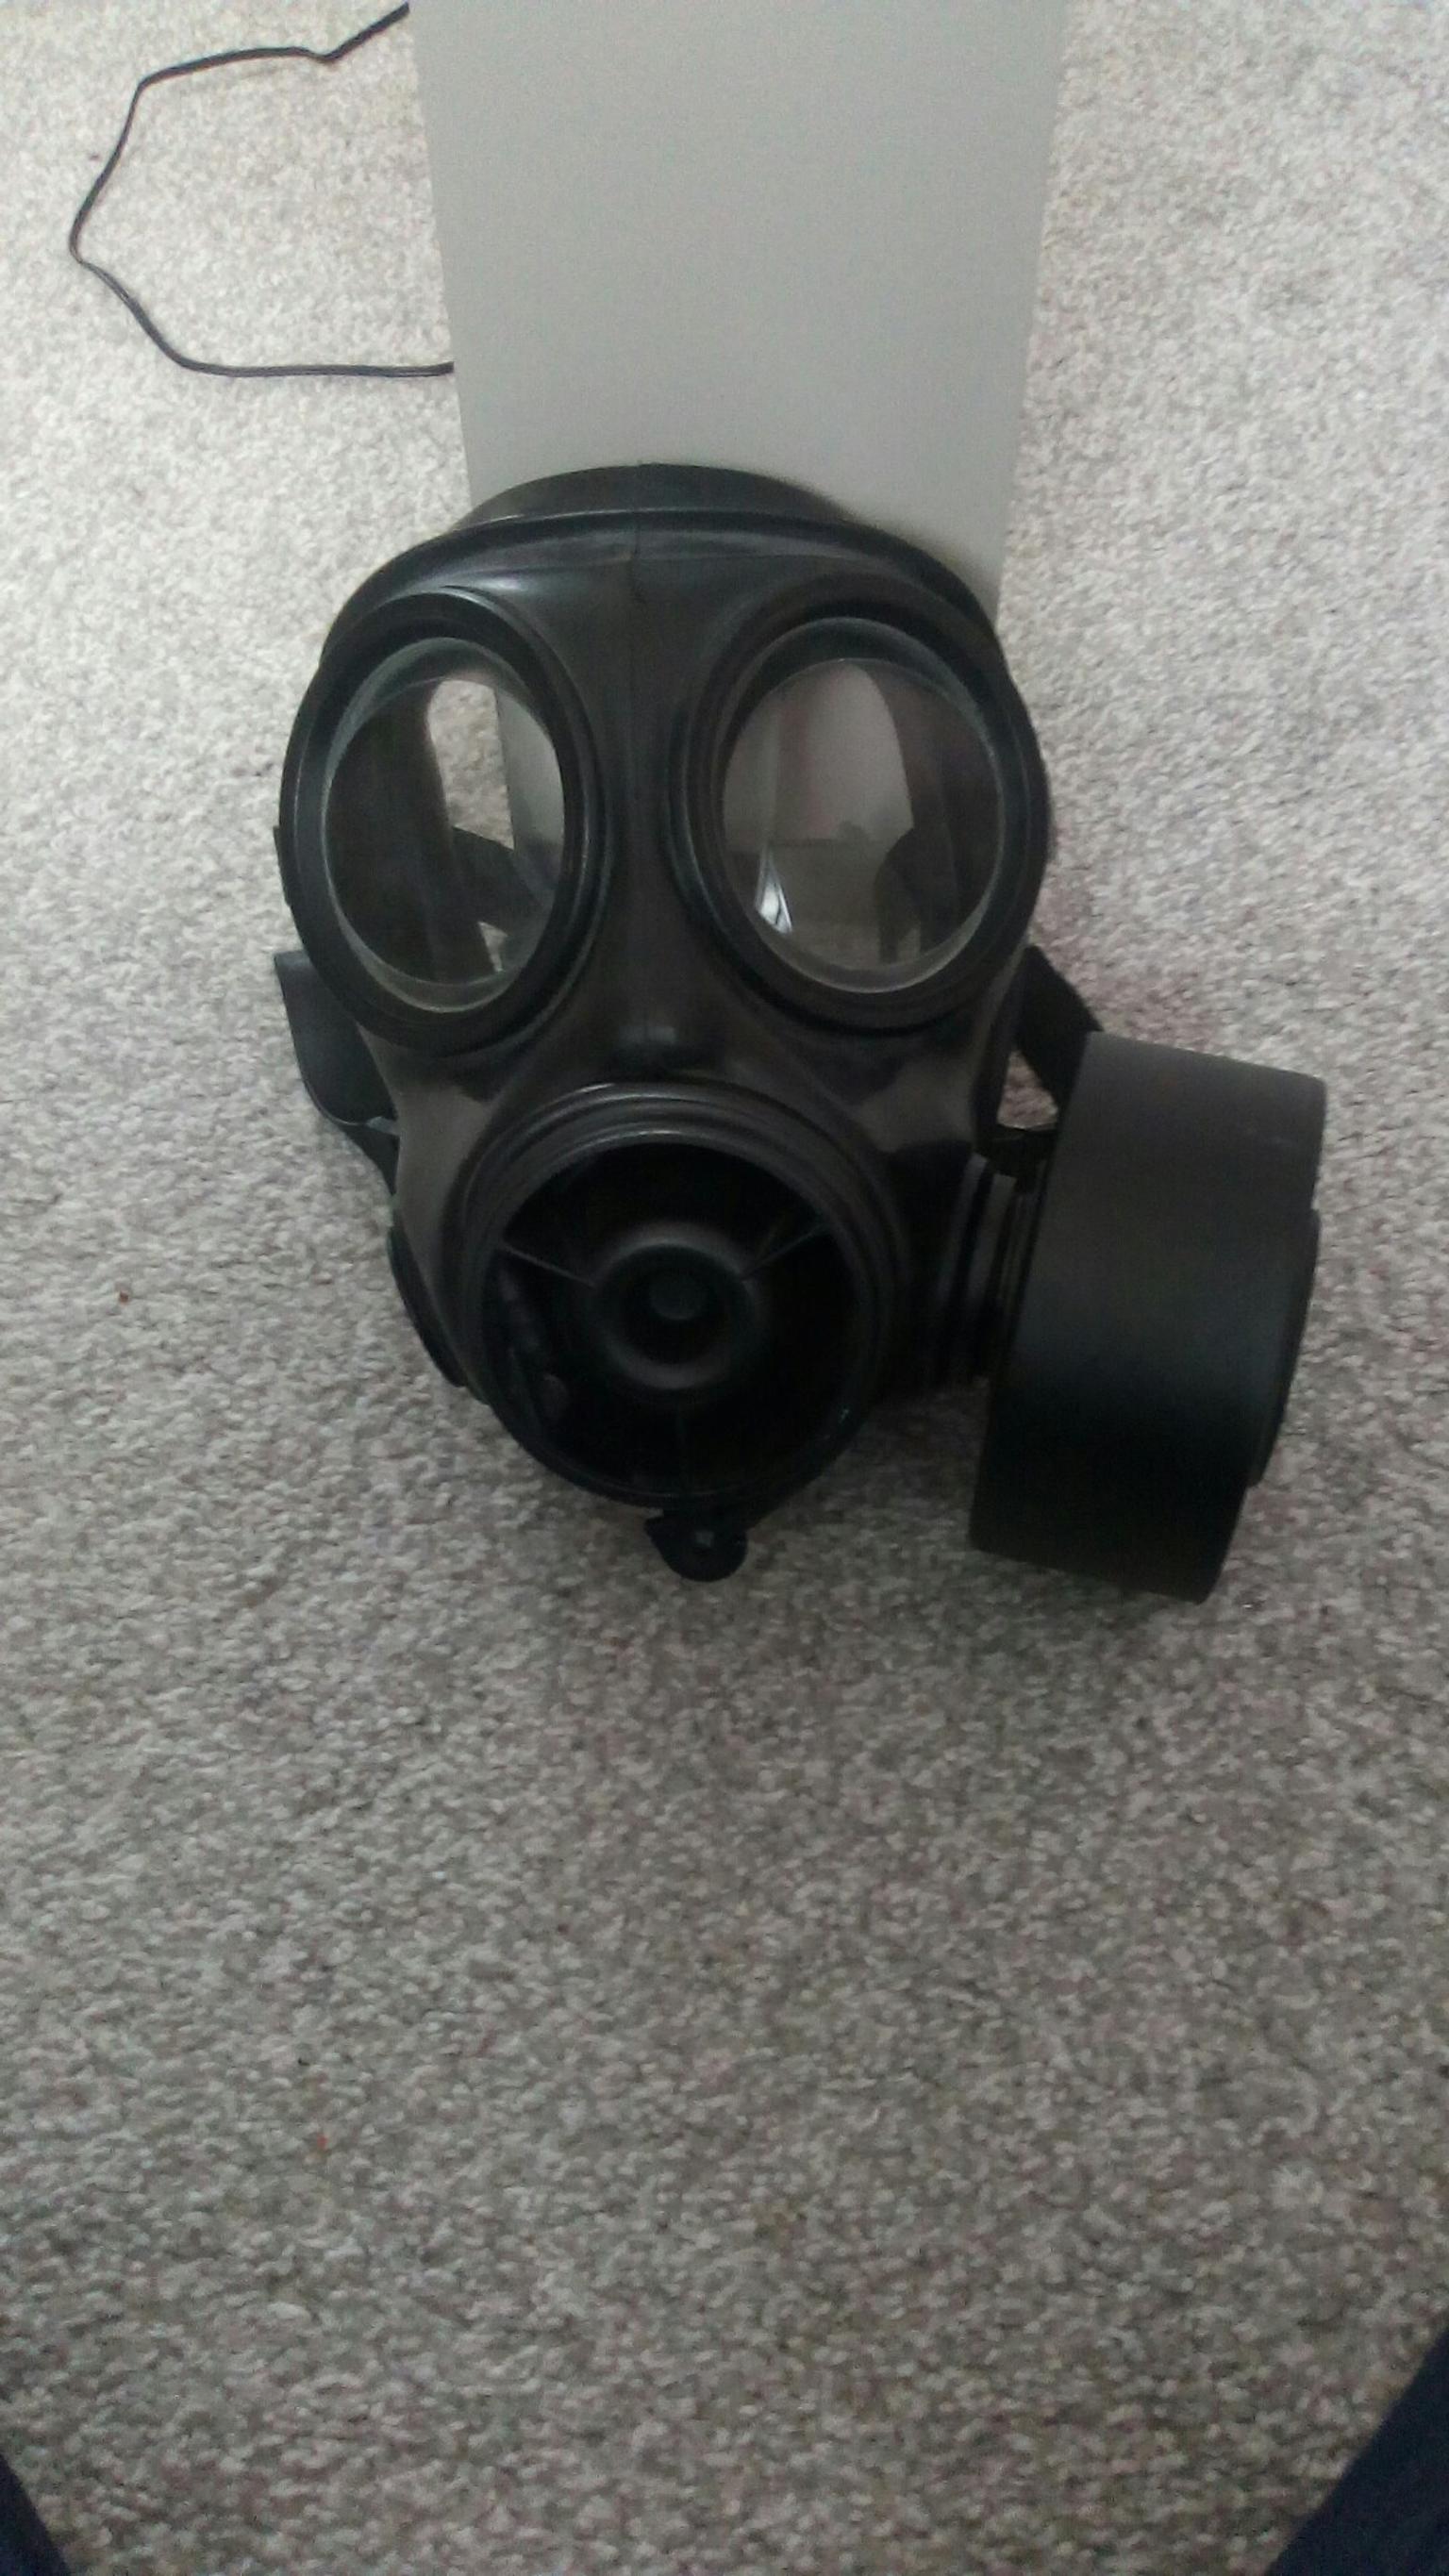 S10 Gas Mask In Dn31 Grimsby For 16 00 For Sale Shpock